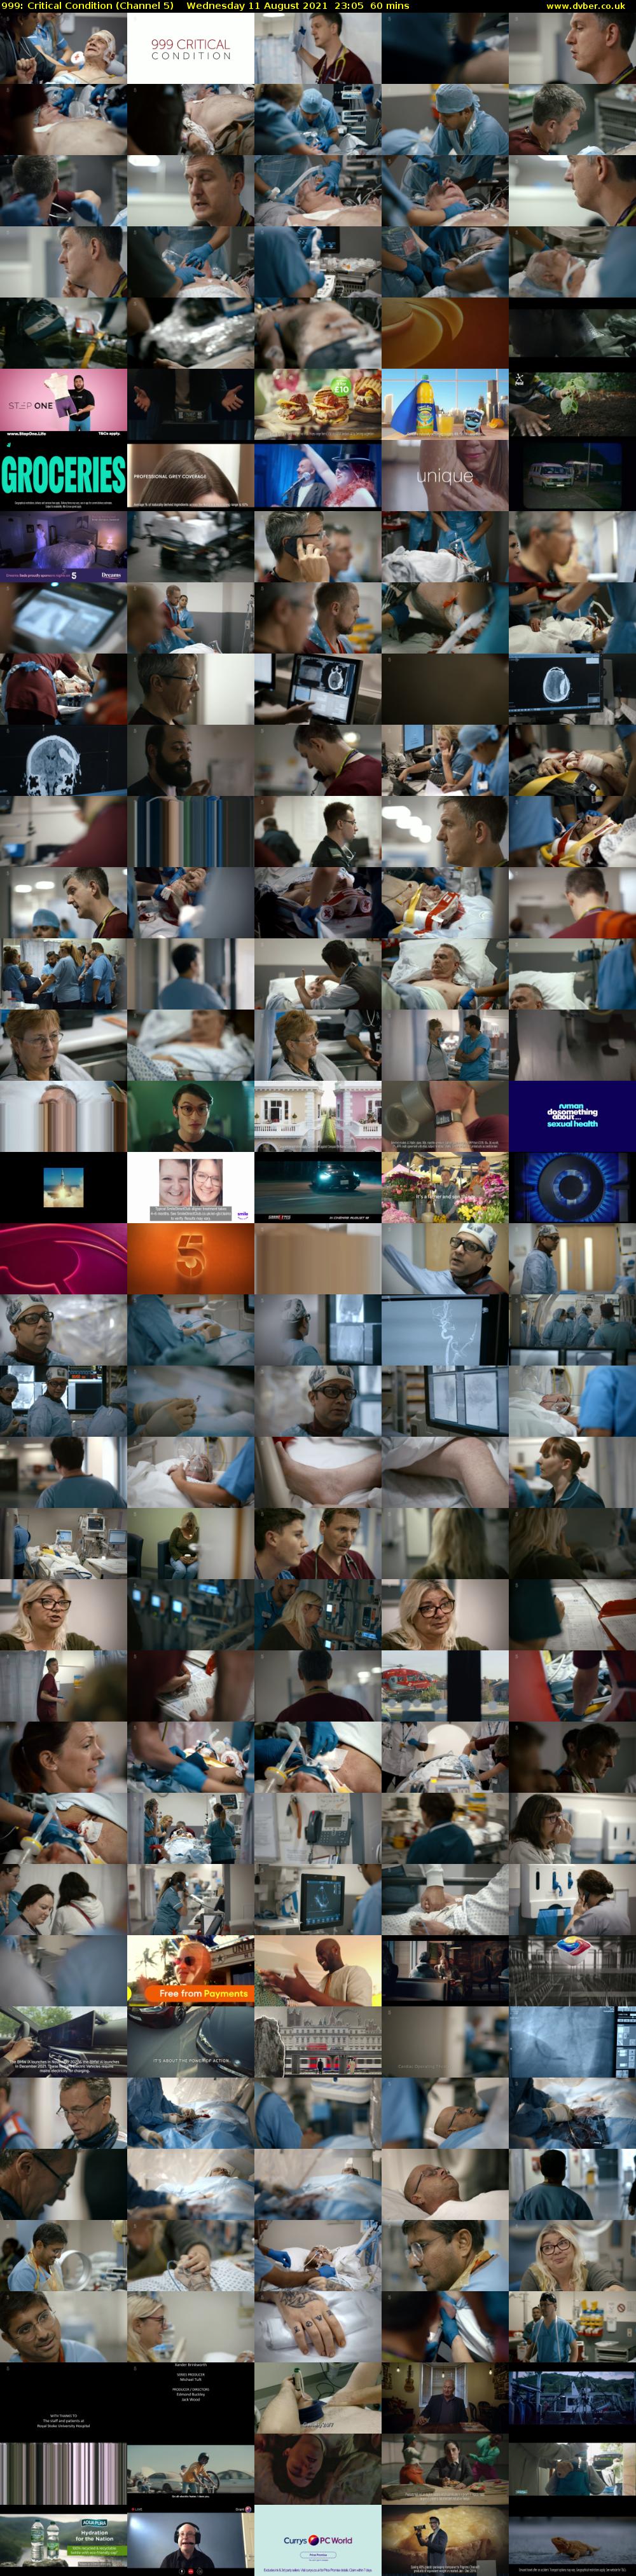 999: Critical Condition (Channel 5) Wednesday 11 August 2021 23:05 - 00:05